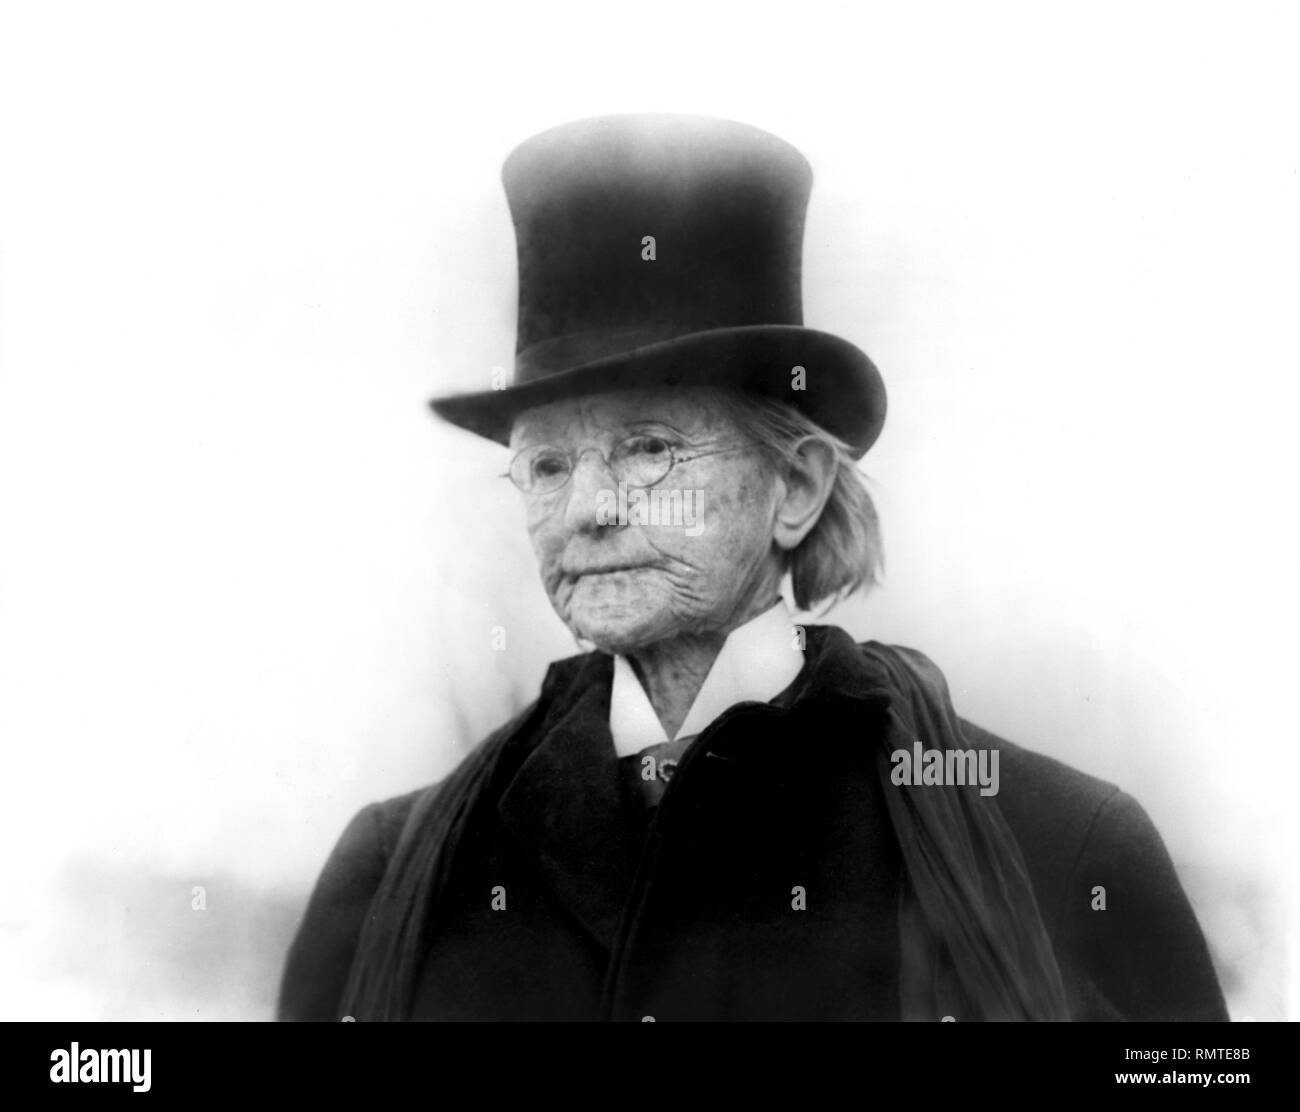 Dr. Mary Edwards Walker (1832-1919), Only Woman to Receive Medal of Honor, Head and Shoulders Portrait Wearing Top Hat and Coat, Bain News Service, 1911 Stock Photo